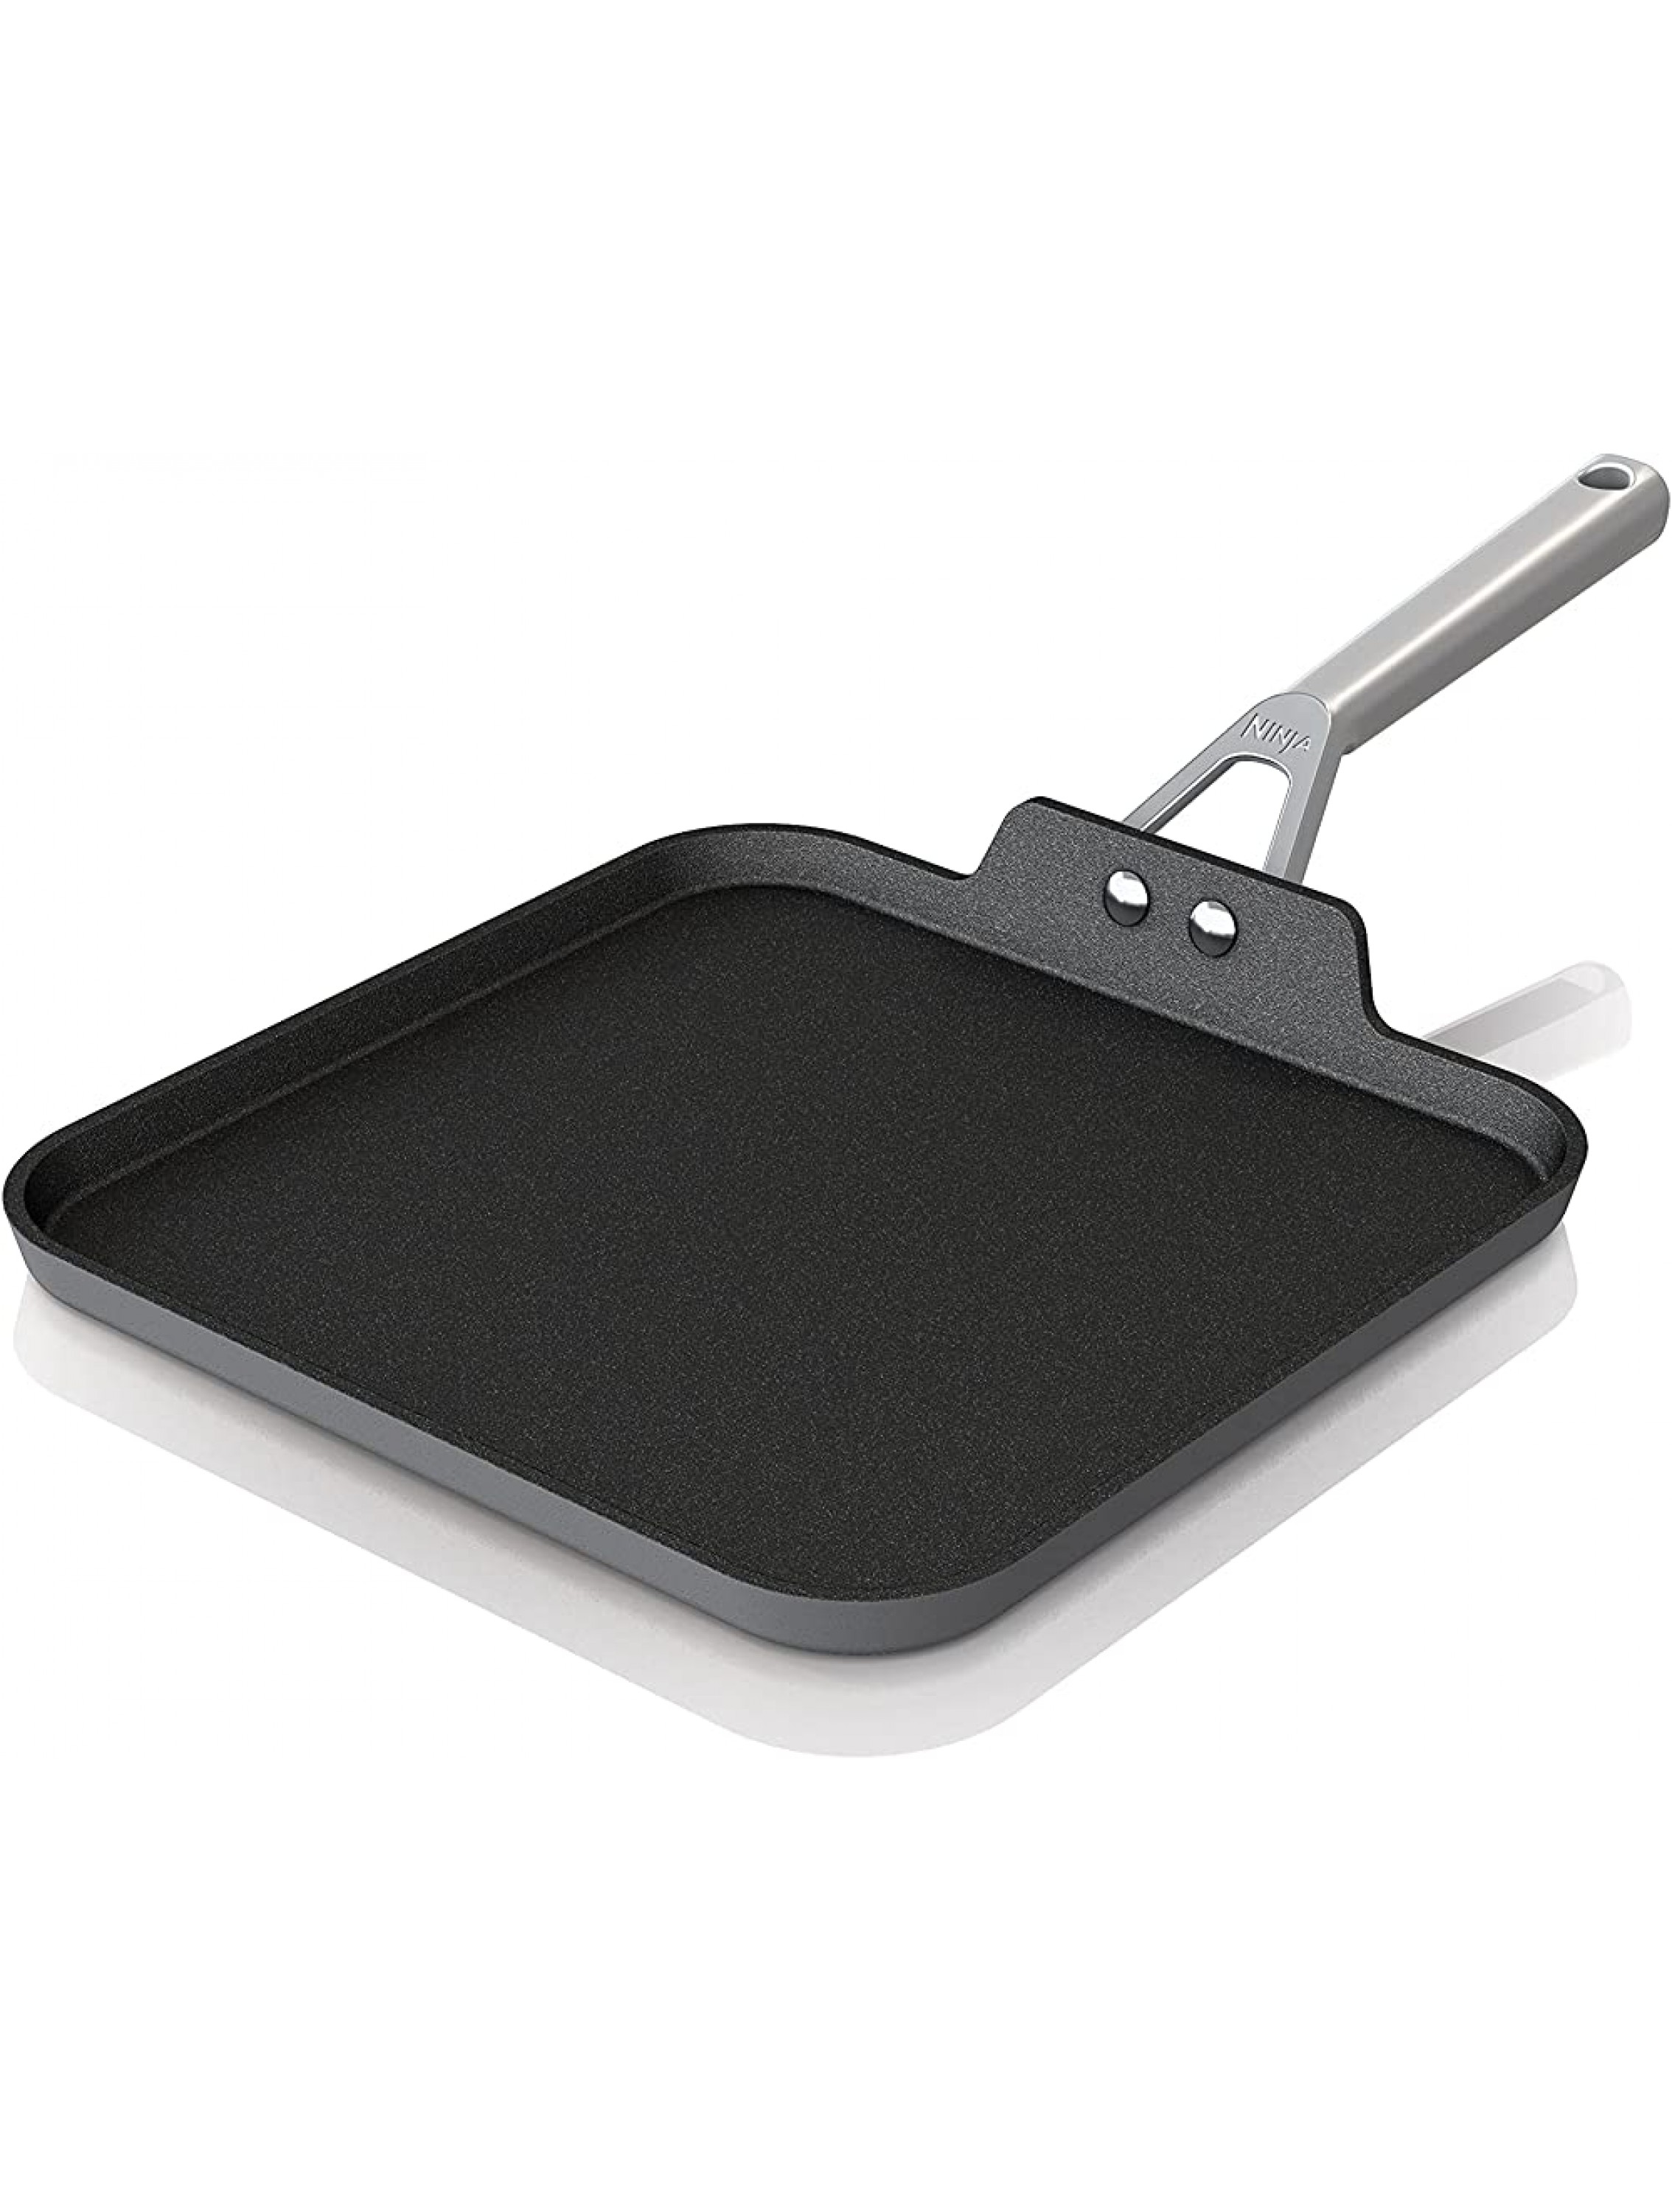 Ninja C30628 Foodi NeverStick Premium 11-Inch Square Griddle Pan Hard-Anodized Nonstick Durable & Oven Safe to 500°F Slate Grey - BDVG7EITG